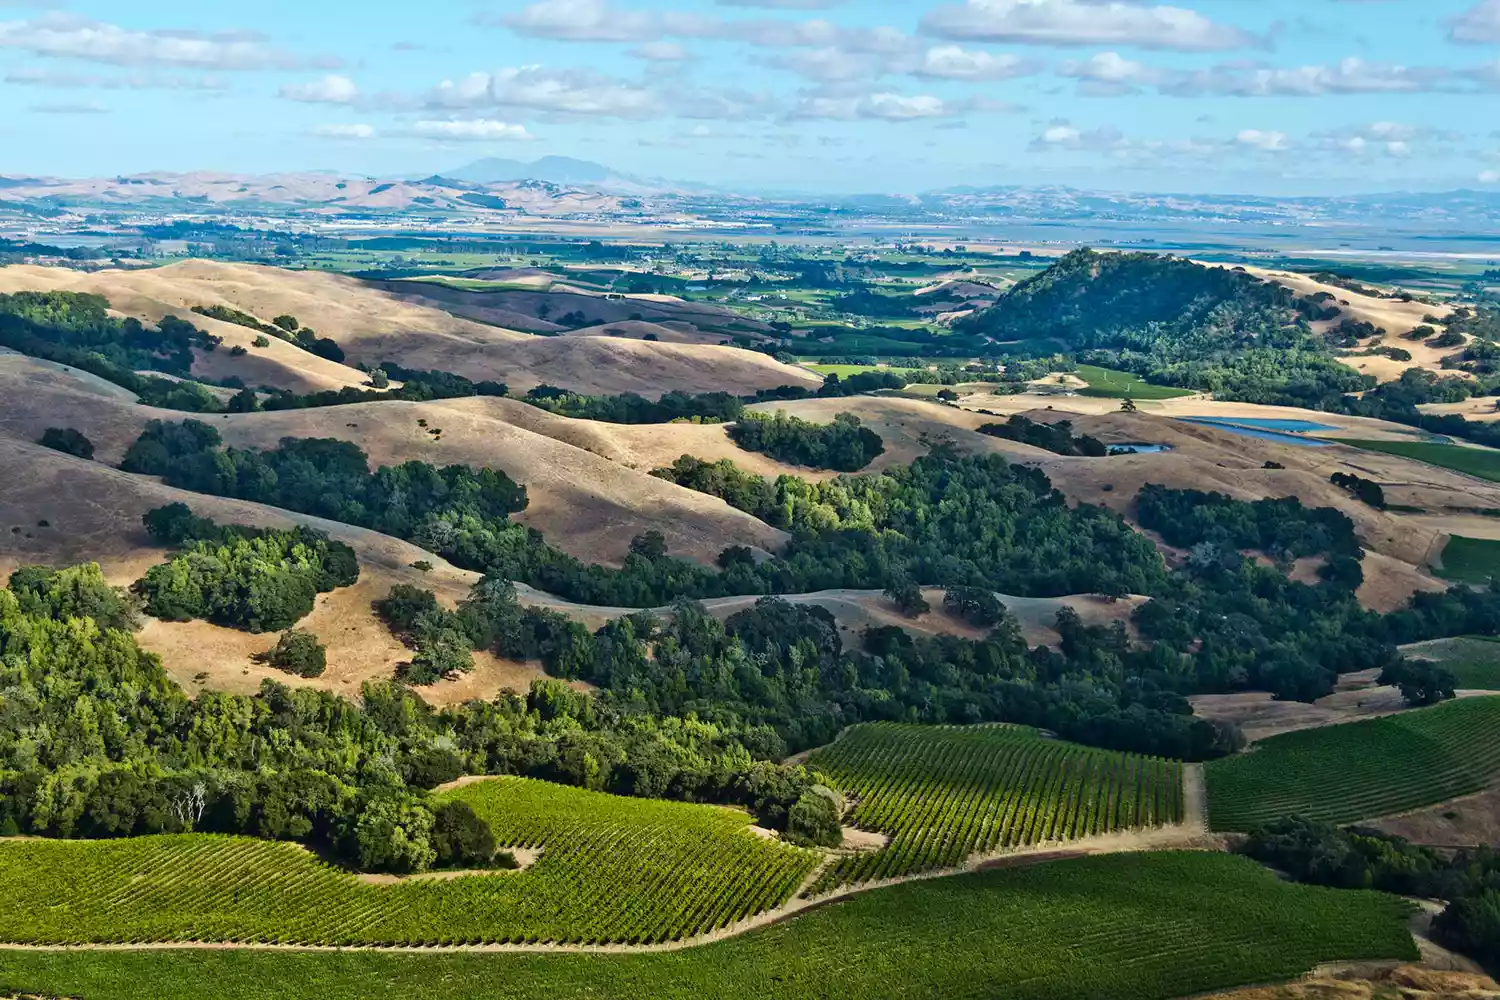 This Californian Destination Has Amazing Wine, Stunning Coastline, and Adorable Small Towns